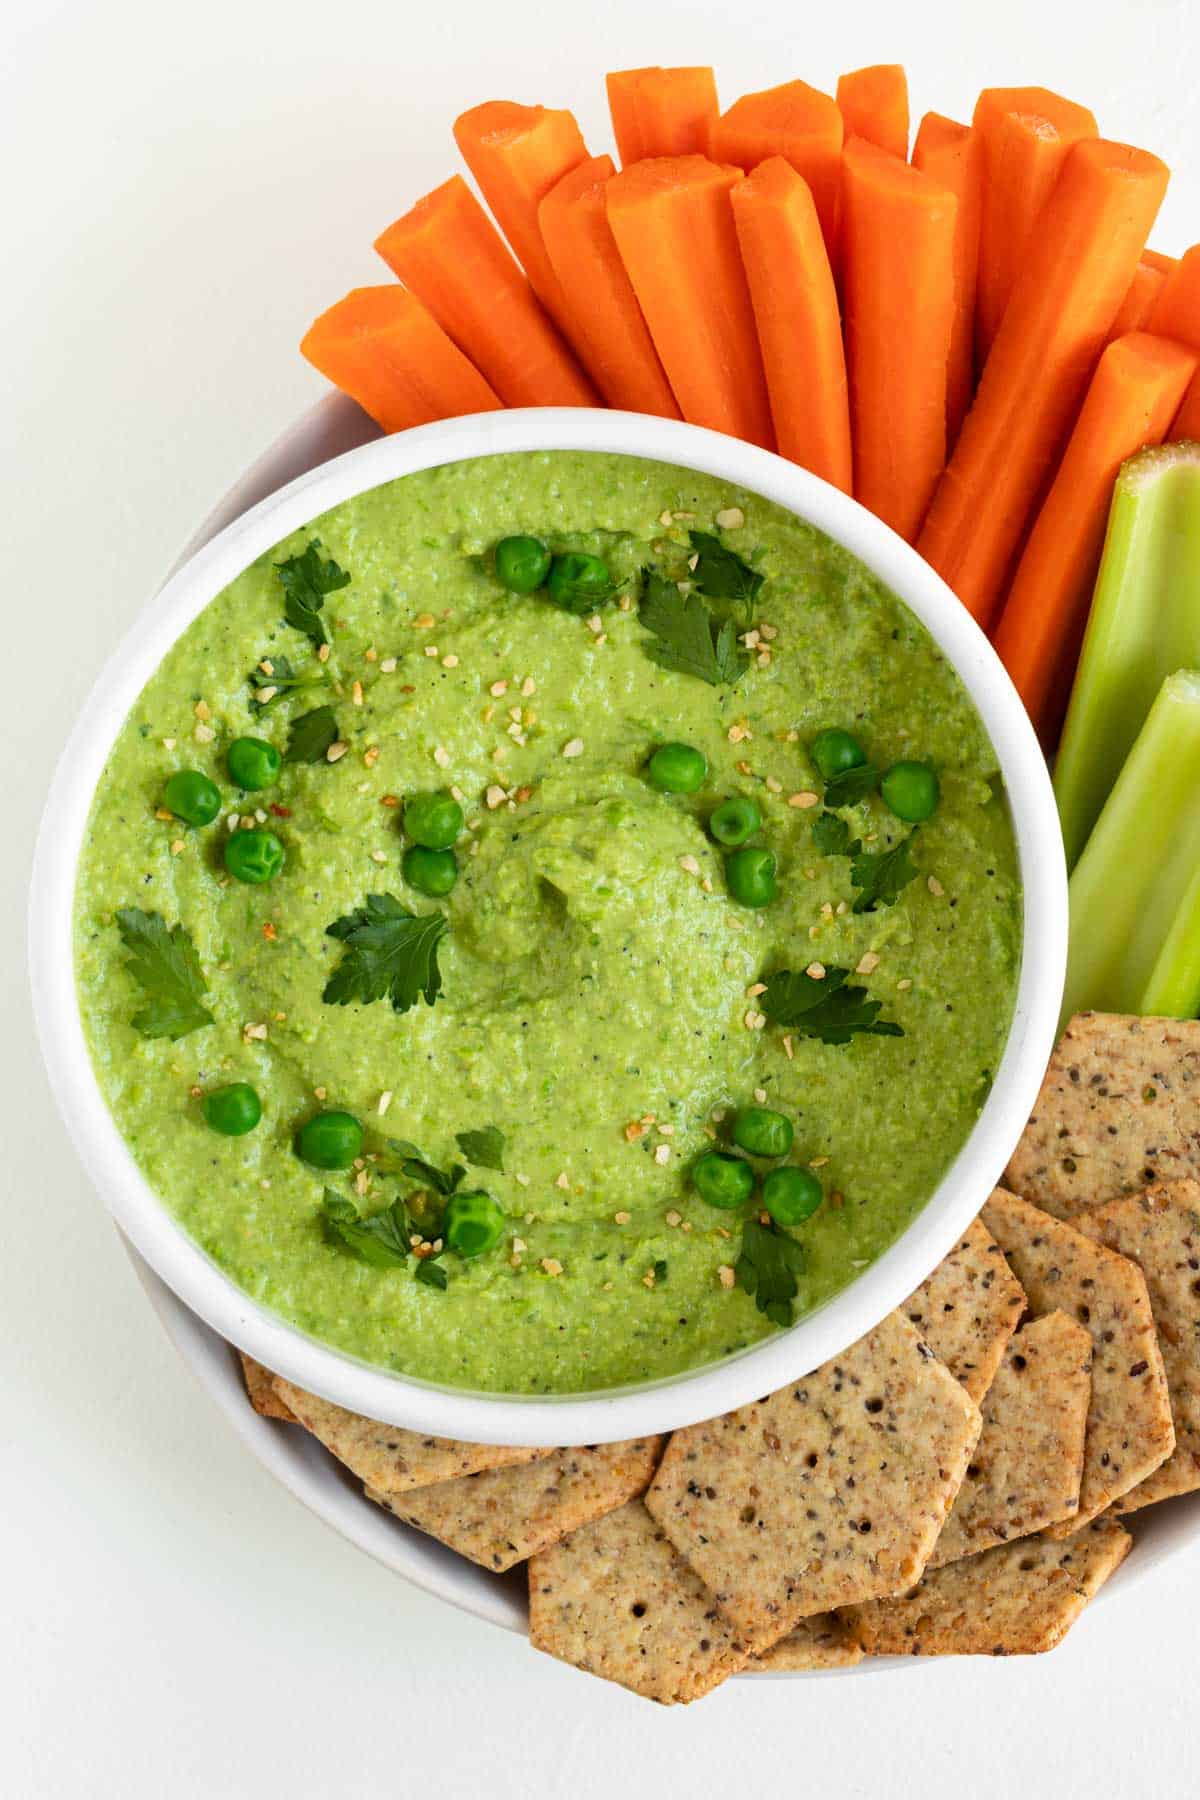 green pea hummus in a white bowl surrounded by sliced carrots, celery, and crackers